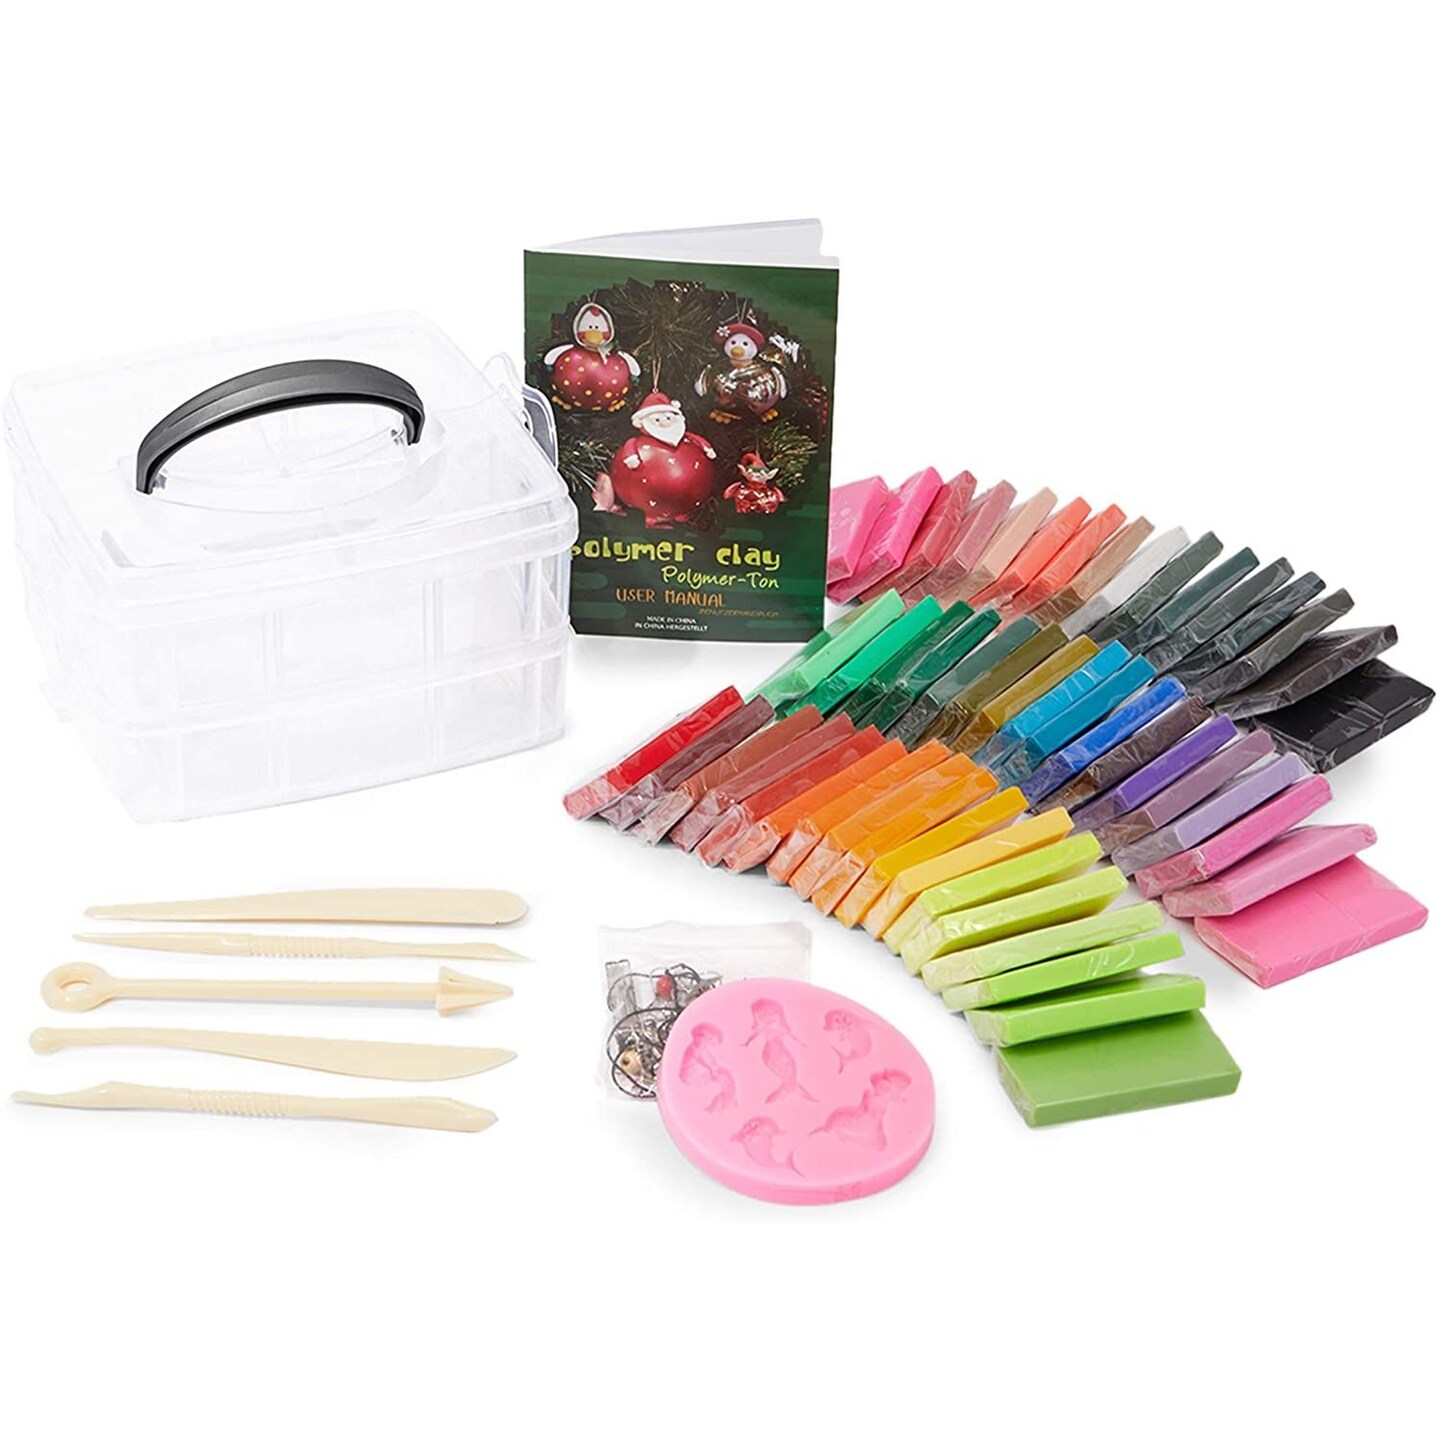 Polymer Clay and Air Dry Clay Tools Complete Clay Tool Set 